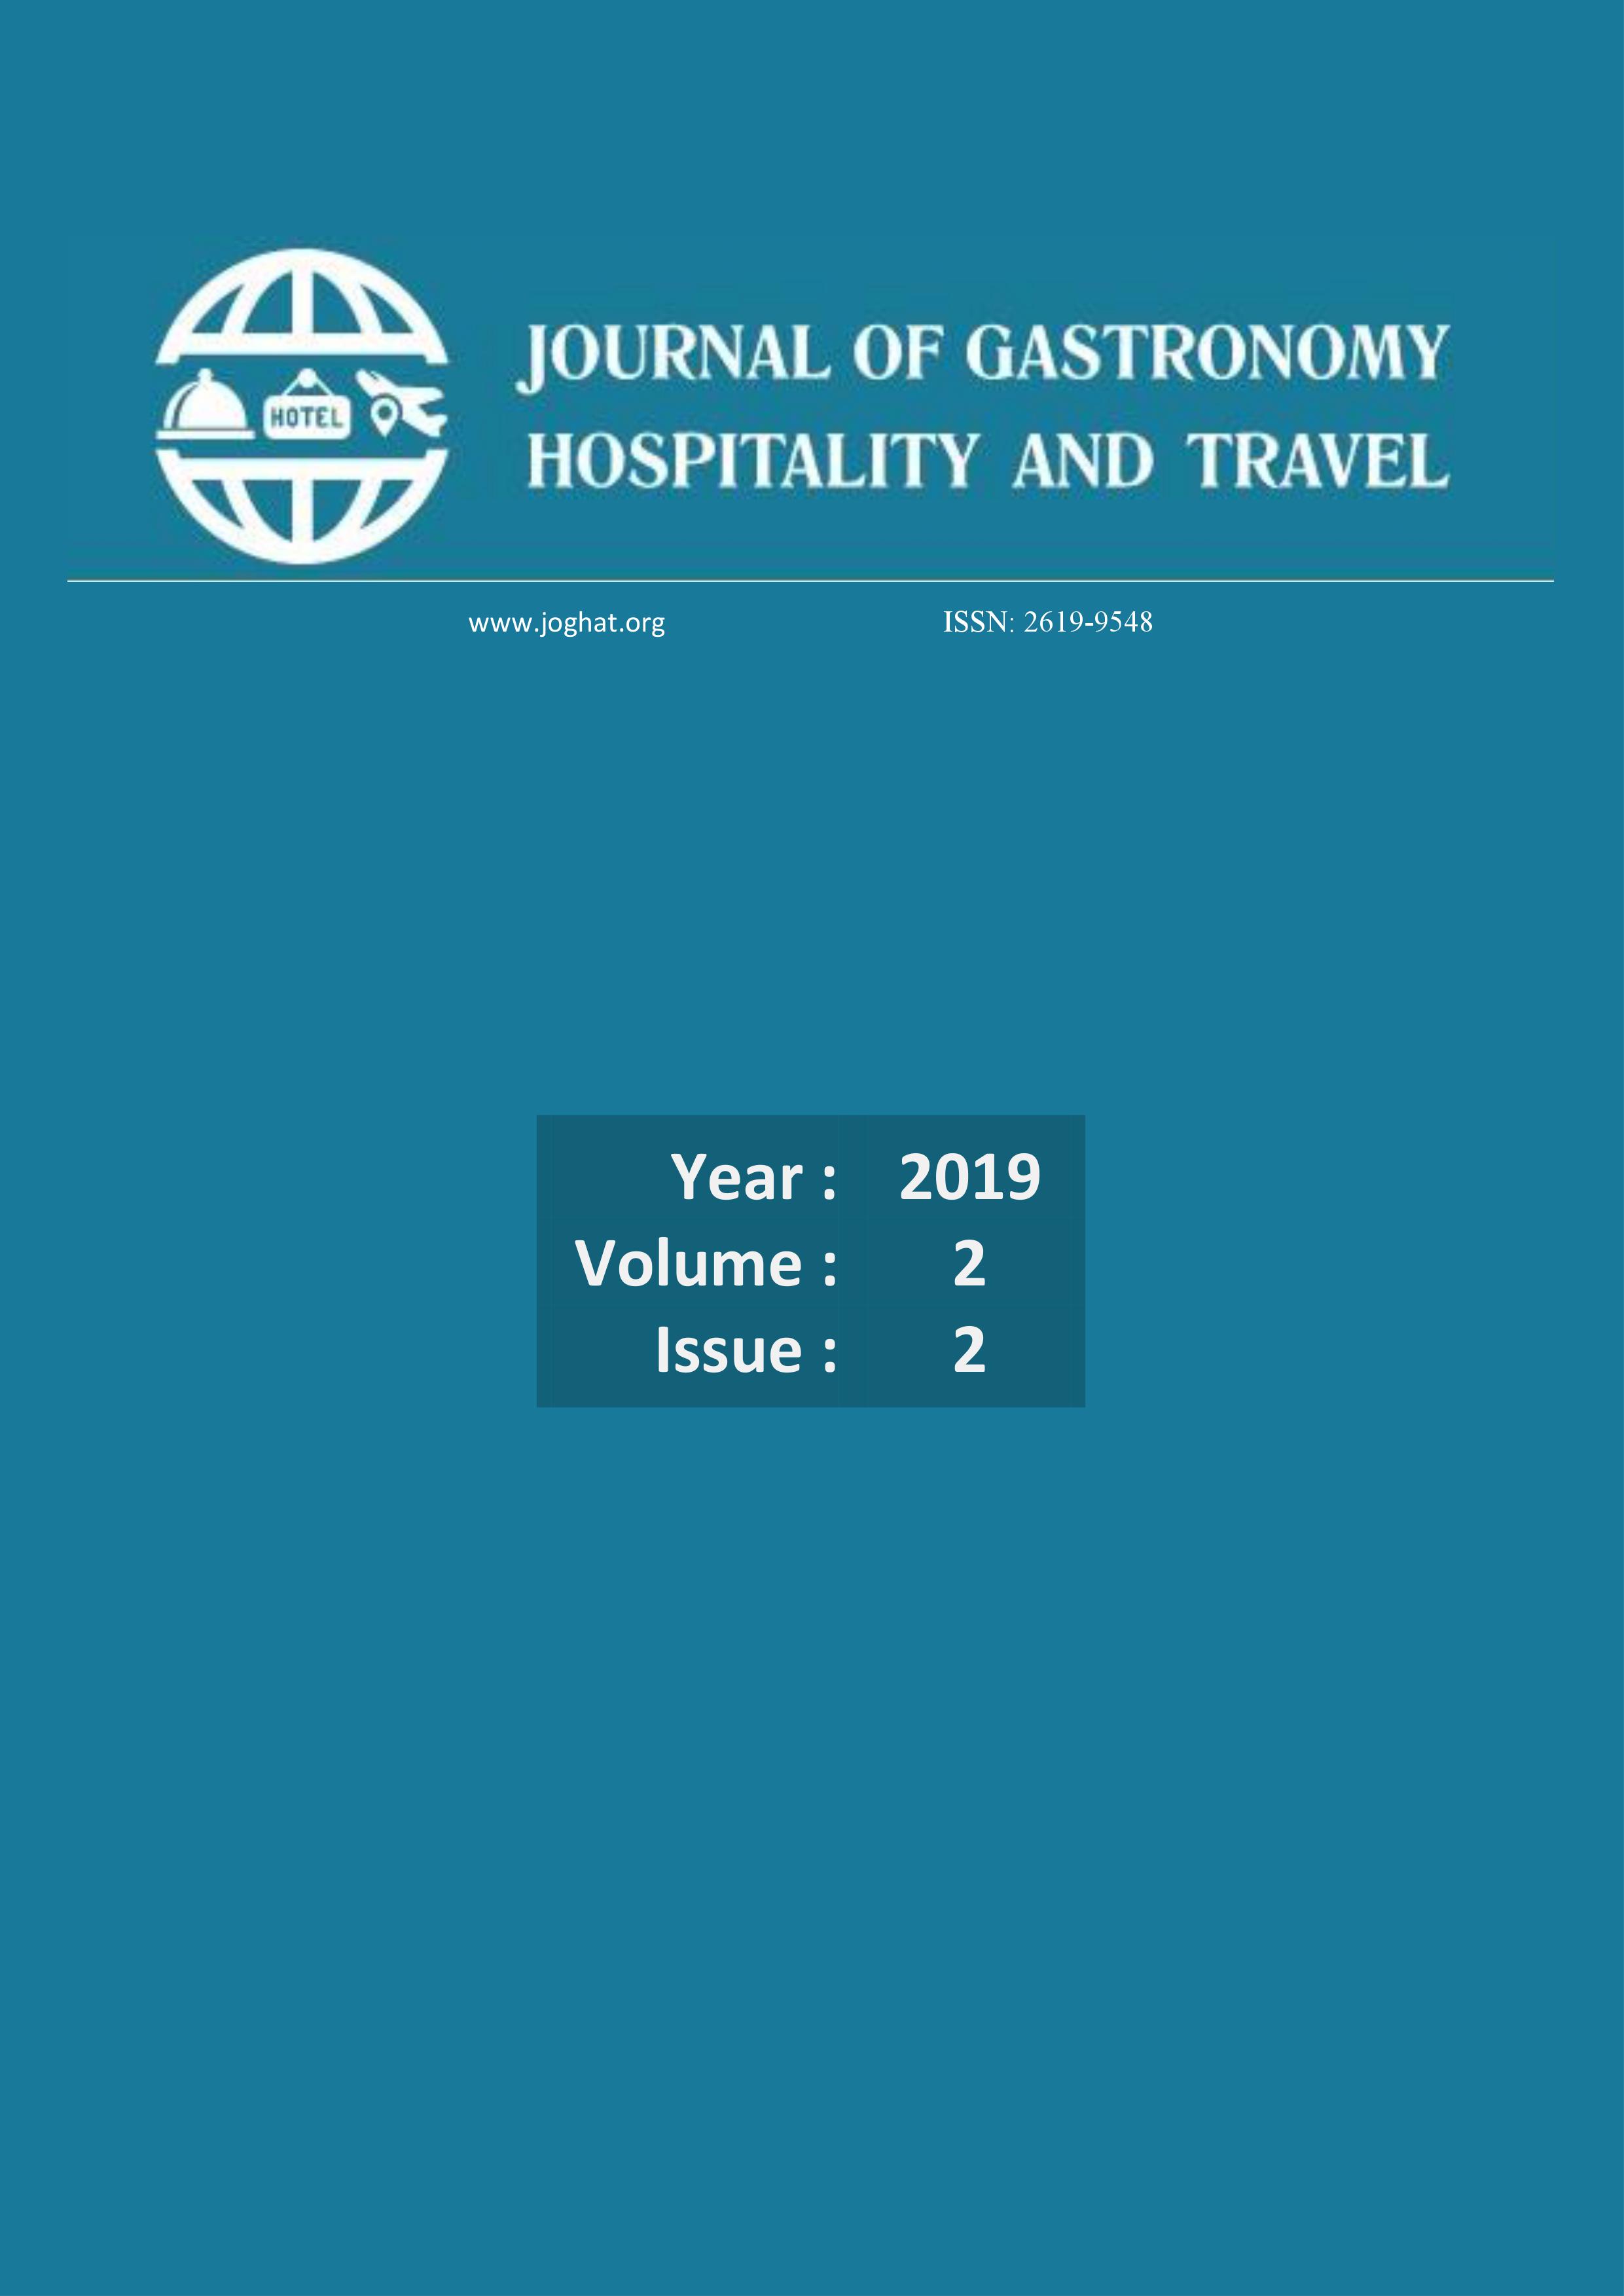 Journal of Gastronomy, Hospitality and Travel